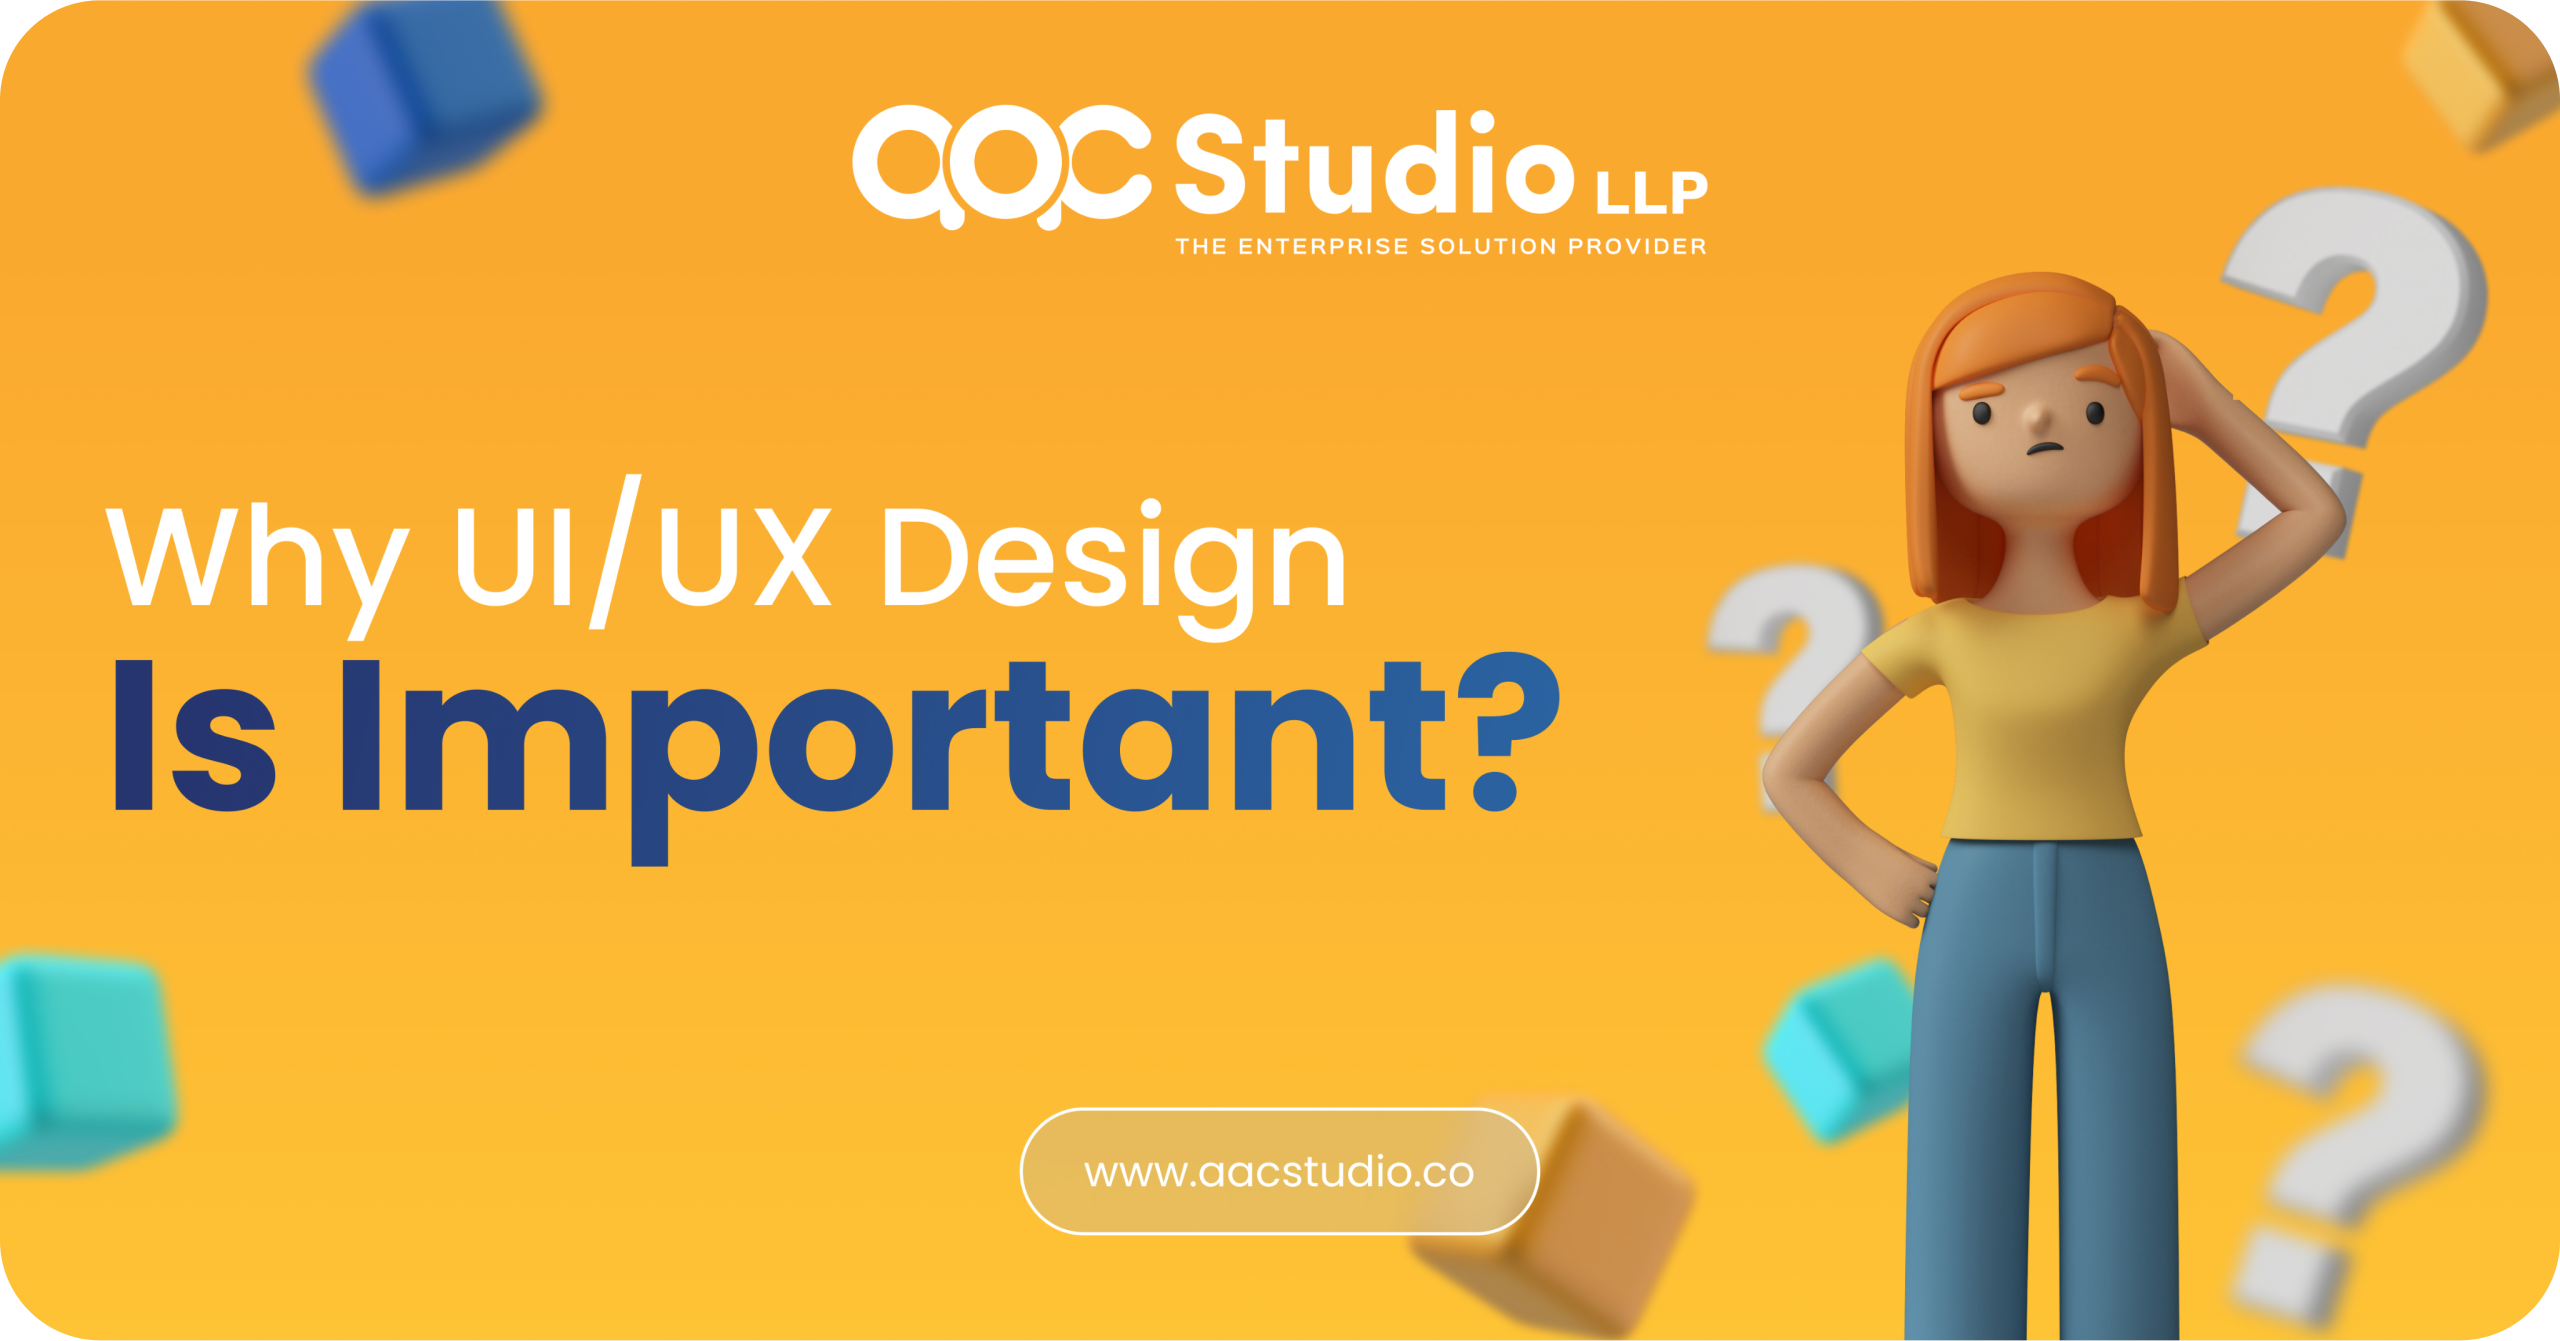 Do You Know Why UI/UX Design is Important?